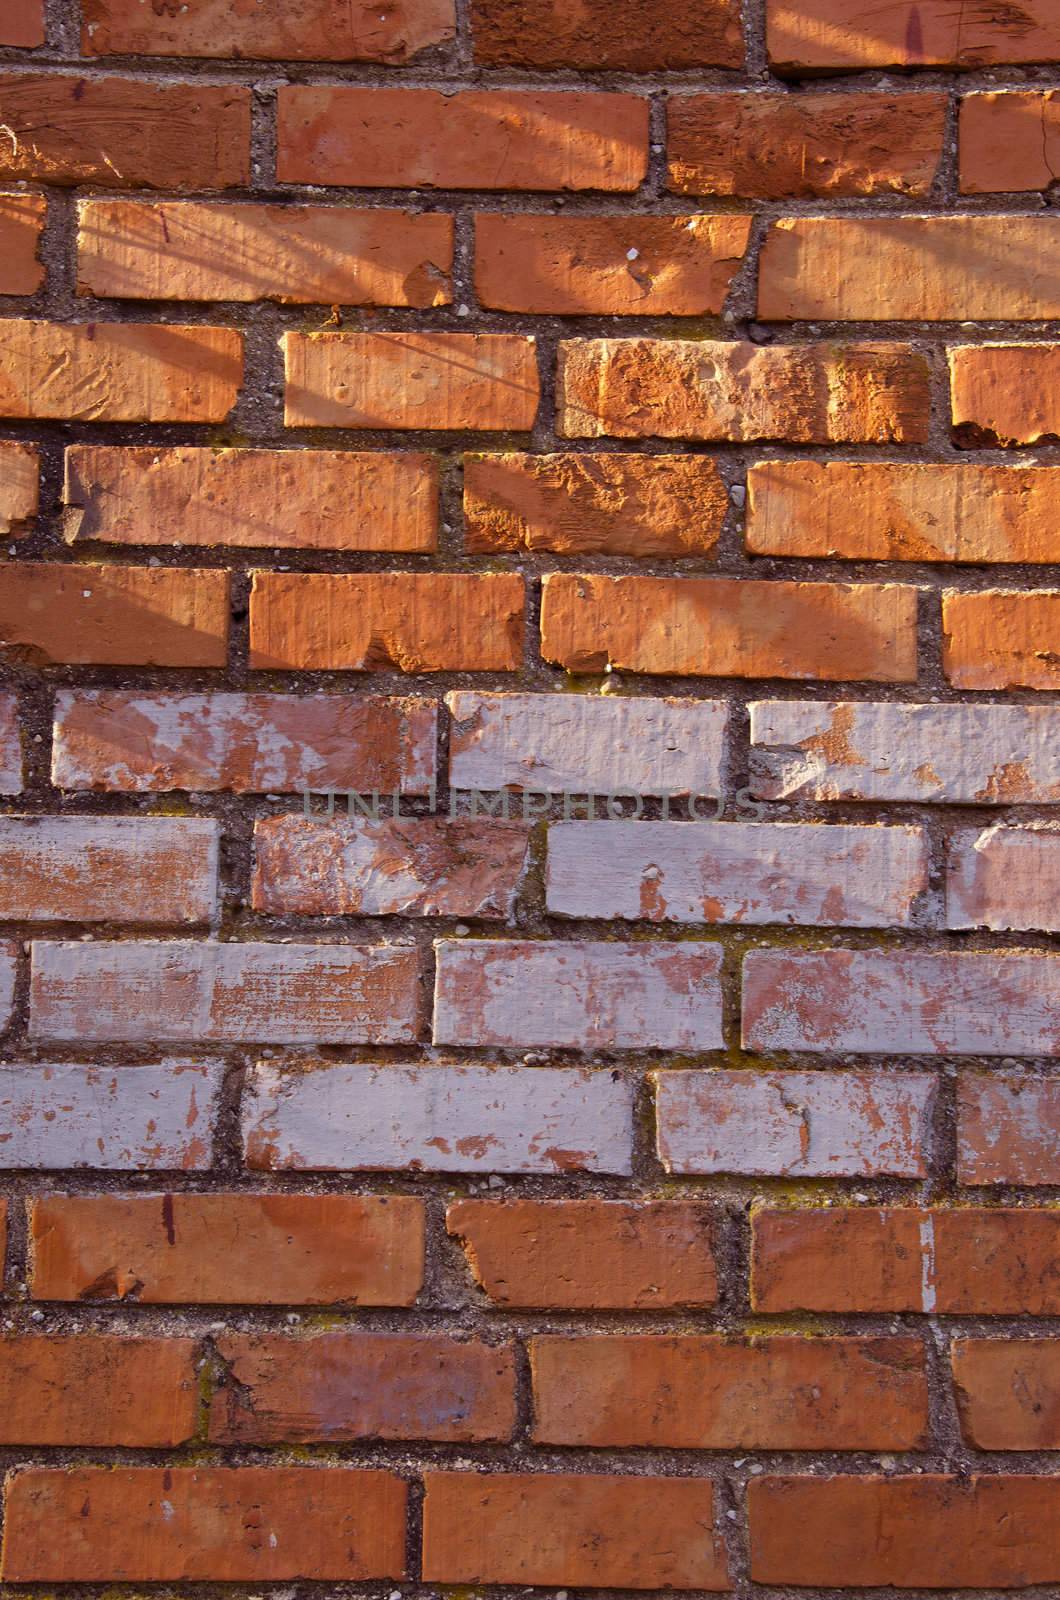 Wall made of red and colored bricks. Architectural decision.